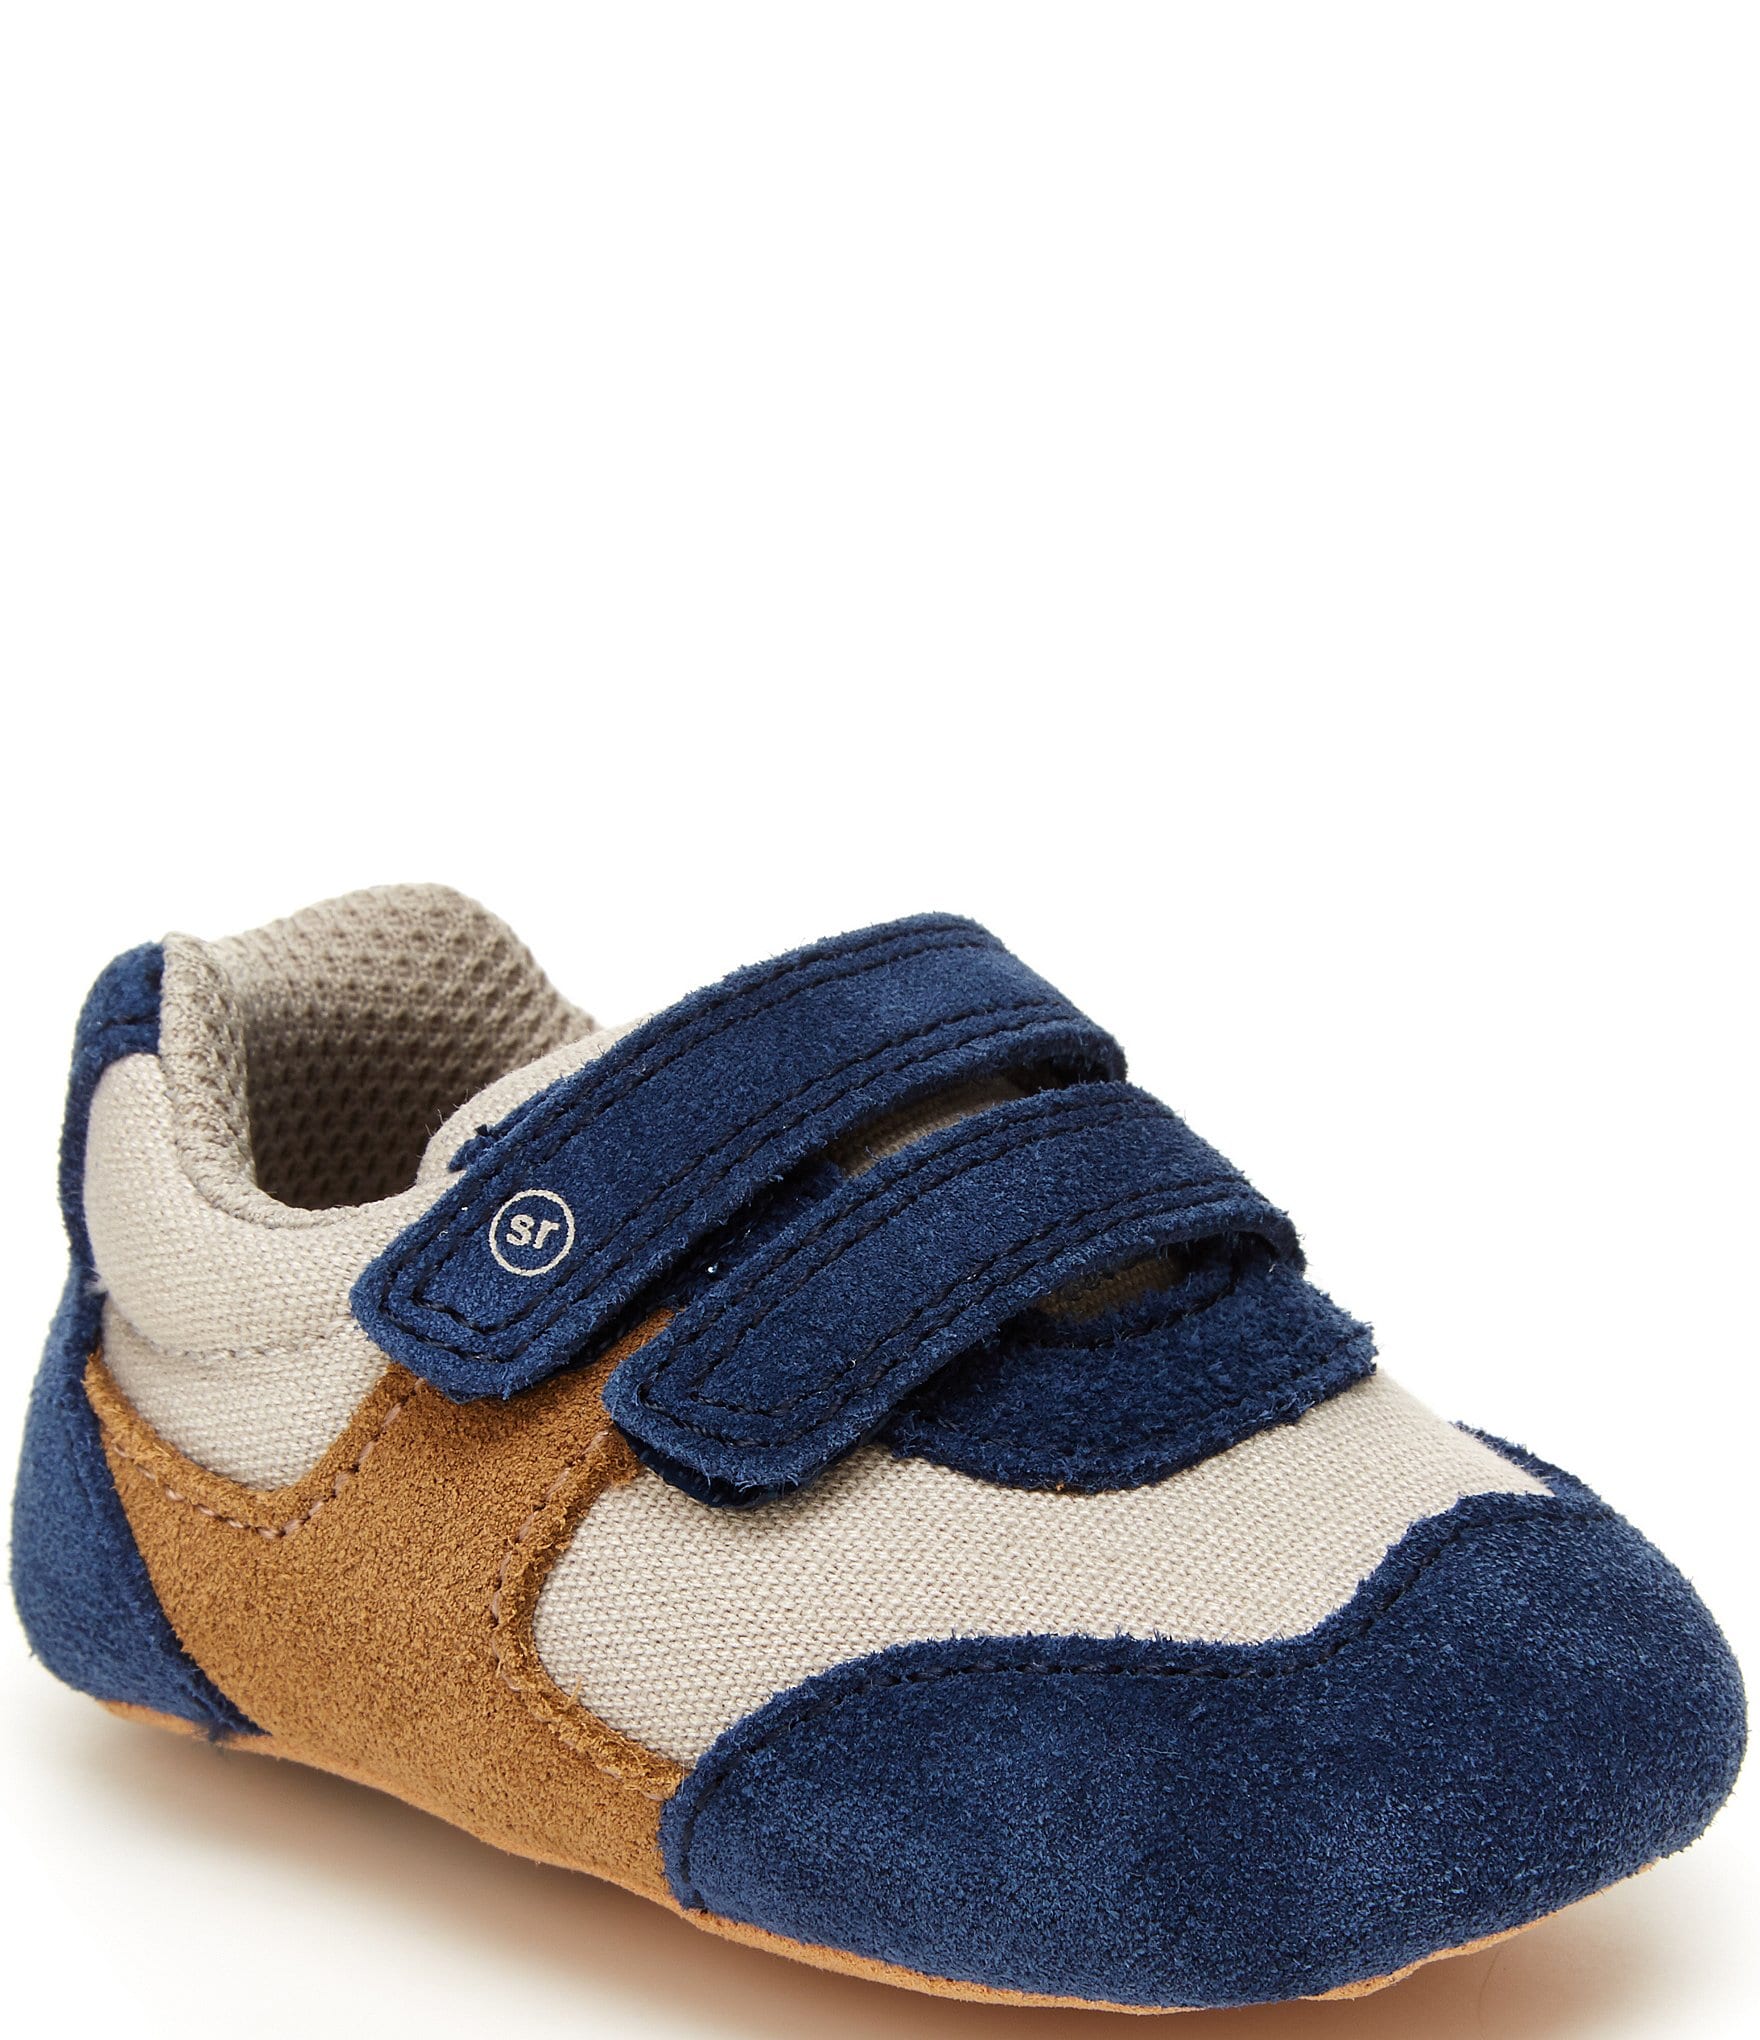 Baby Infant Girl Boy Crib Shoes Blue 0-6 6-12 12-18 Months